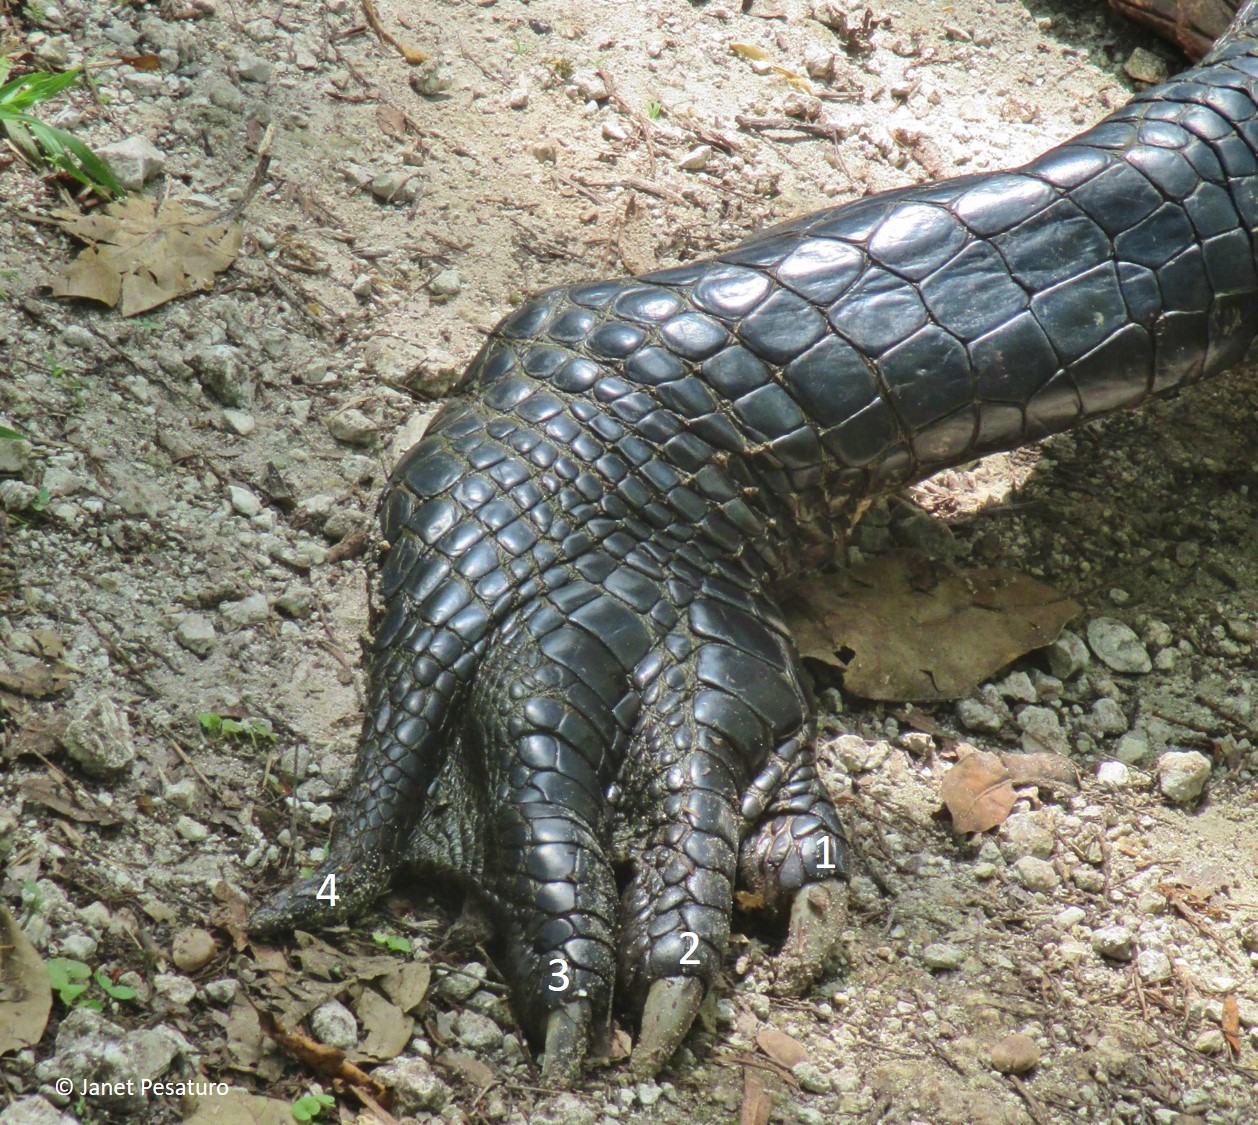 An alligator's right hind foot, with toes numbered.